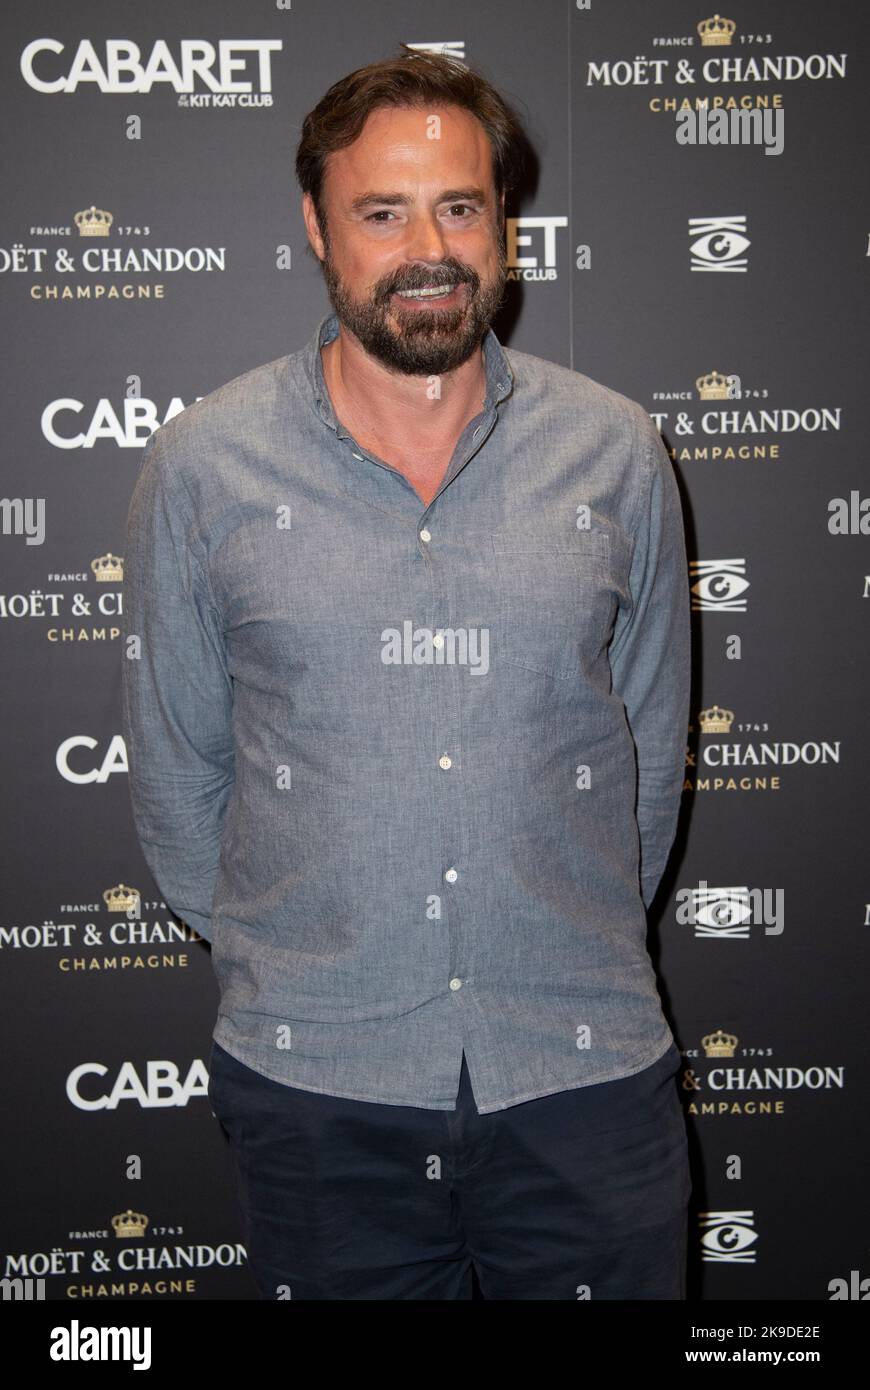 London, UK. 27th Oct, 2022. Jamie Theakston attends the Gala Night performance of 'Cabaret At The Kit Kat Club' London England UK on the 27th October 2022. Photo by Gary Mitchell Credit: Gary Mitchell, GMP Media/Alamy Live News Stock Photo